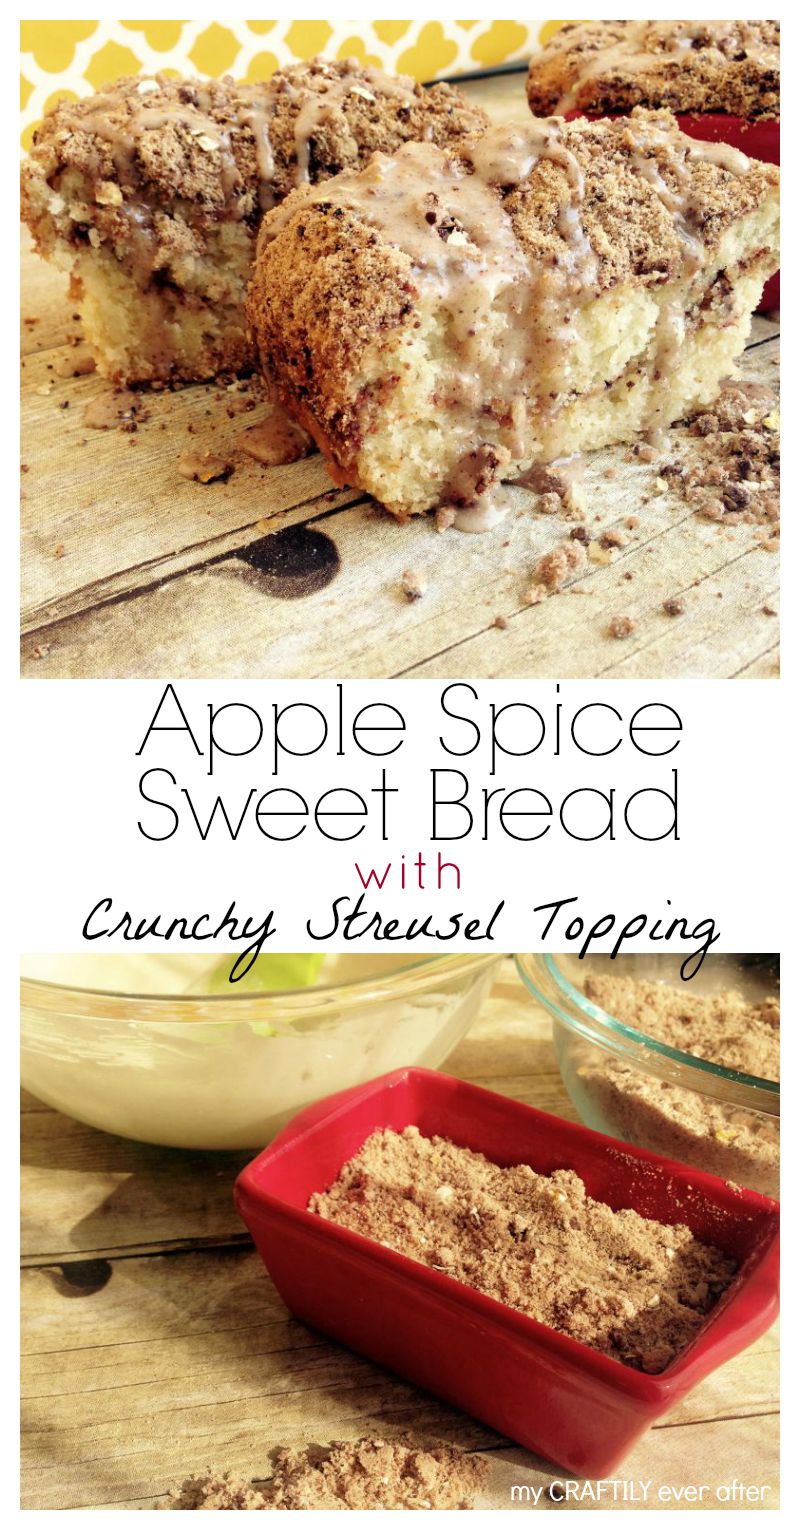 Apple Spice Sweet Bread with Crunchy Streusel Topping